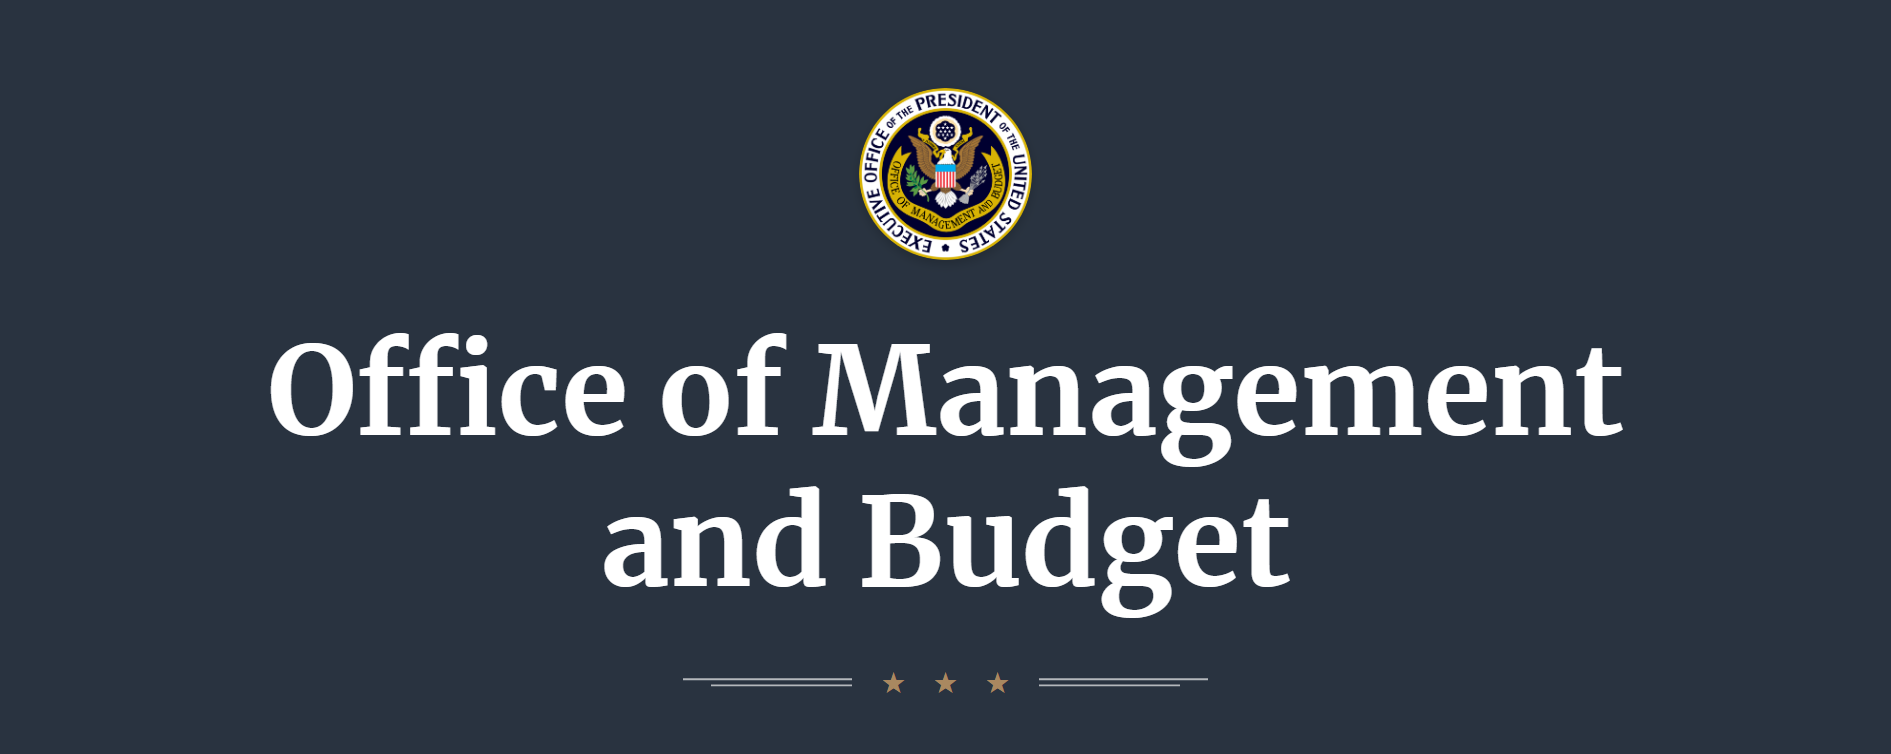 Office_of_Management_and_Budget